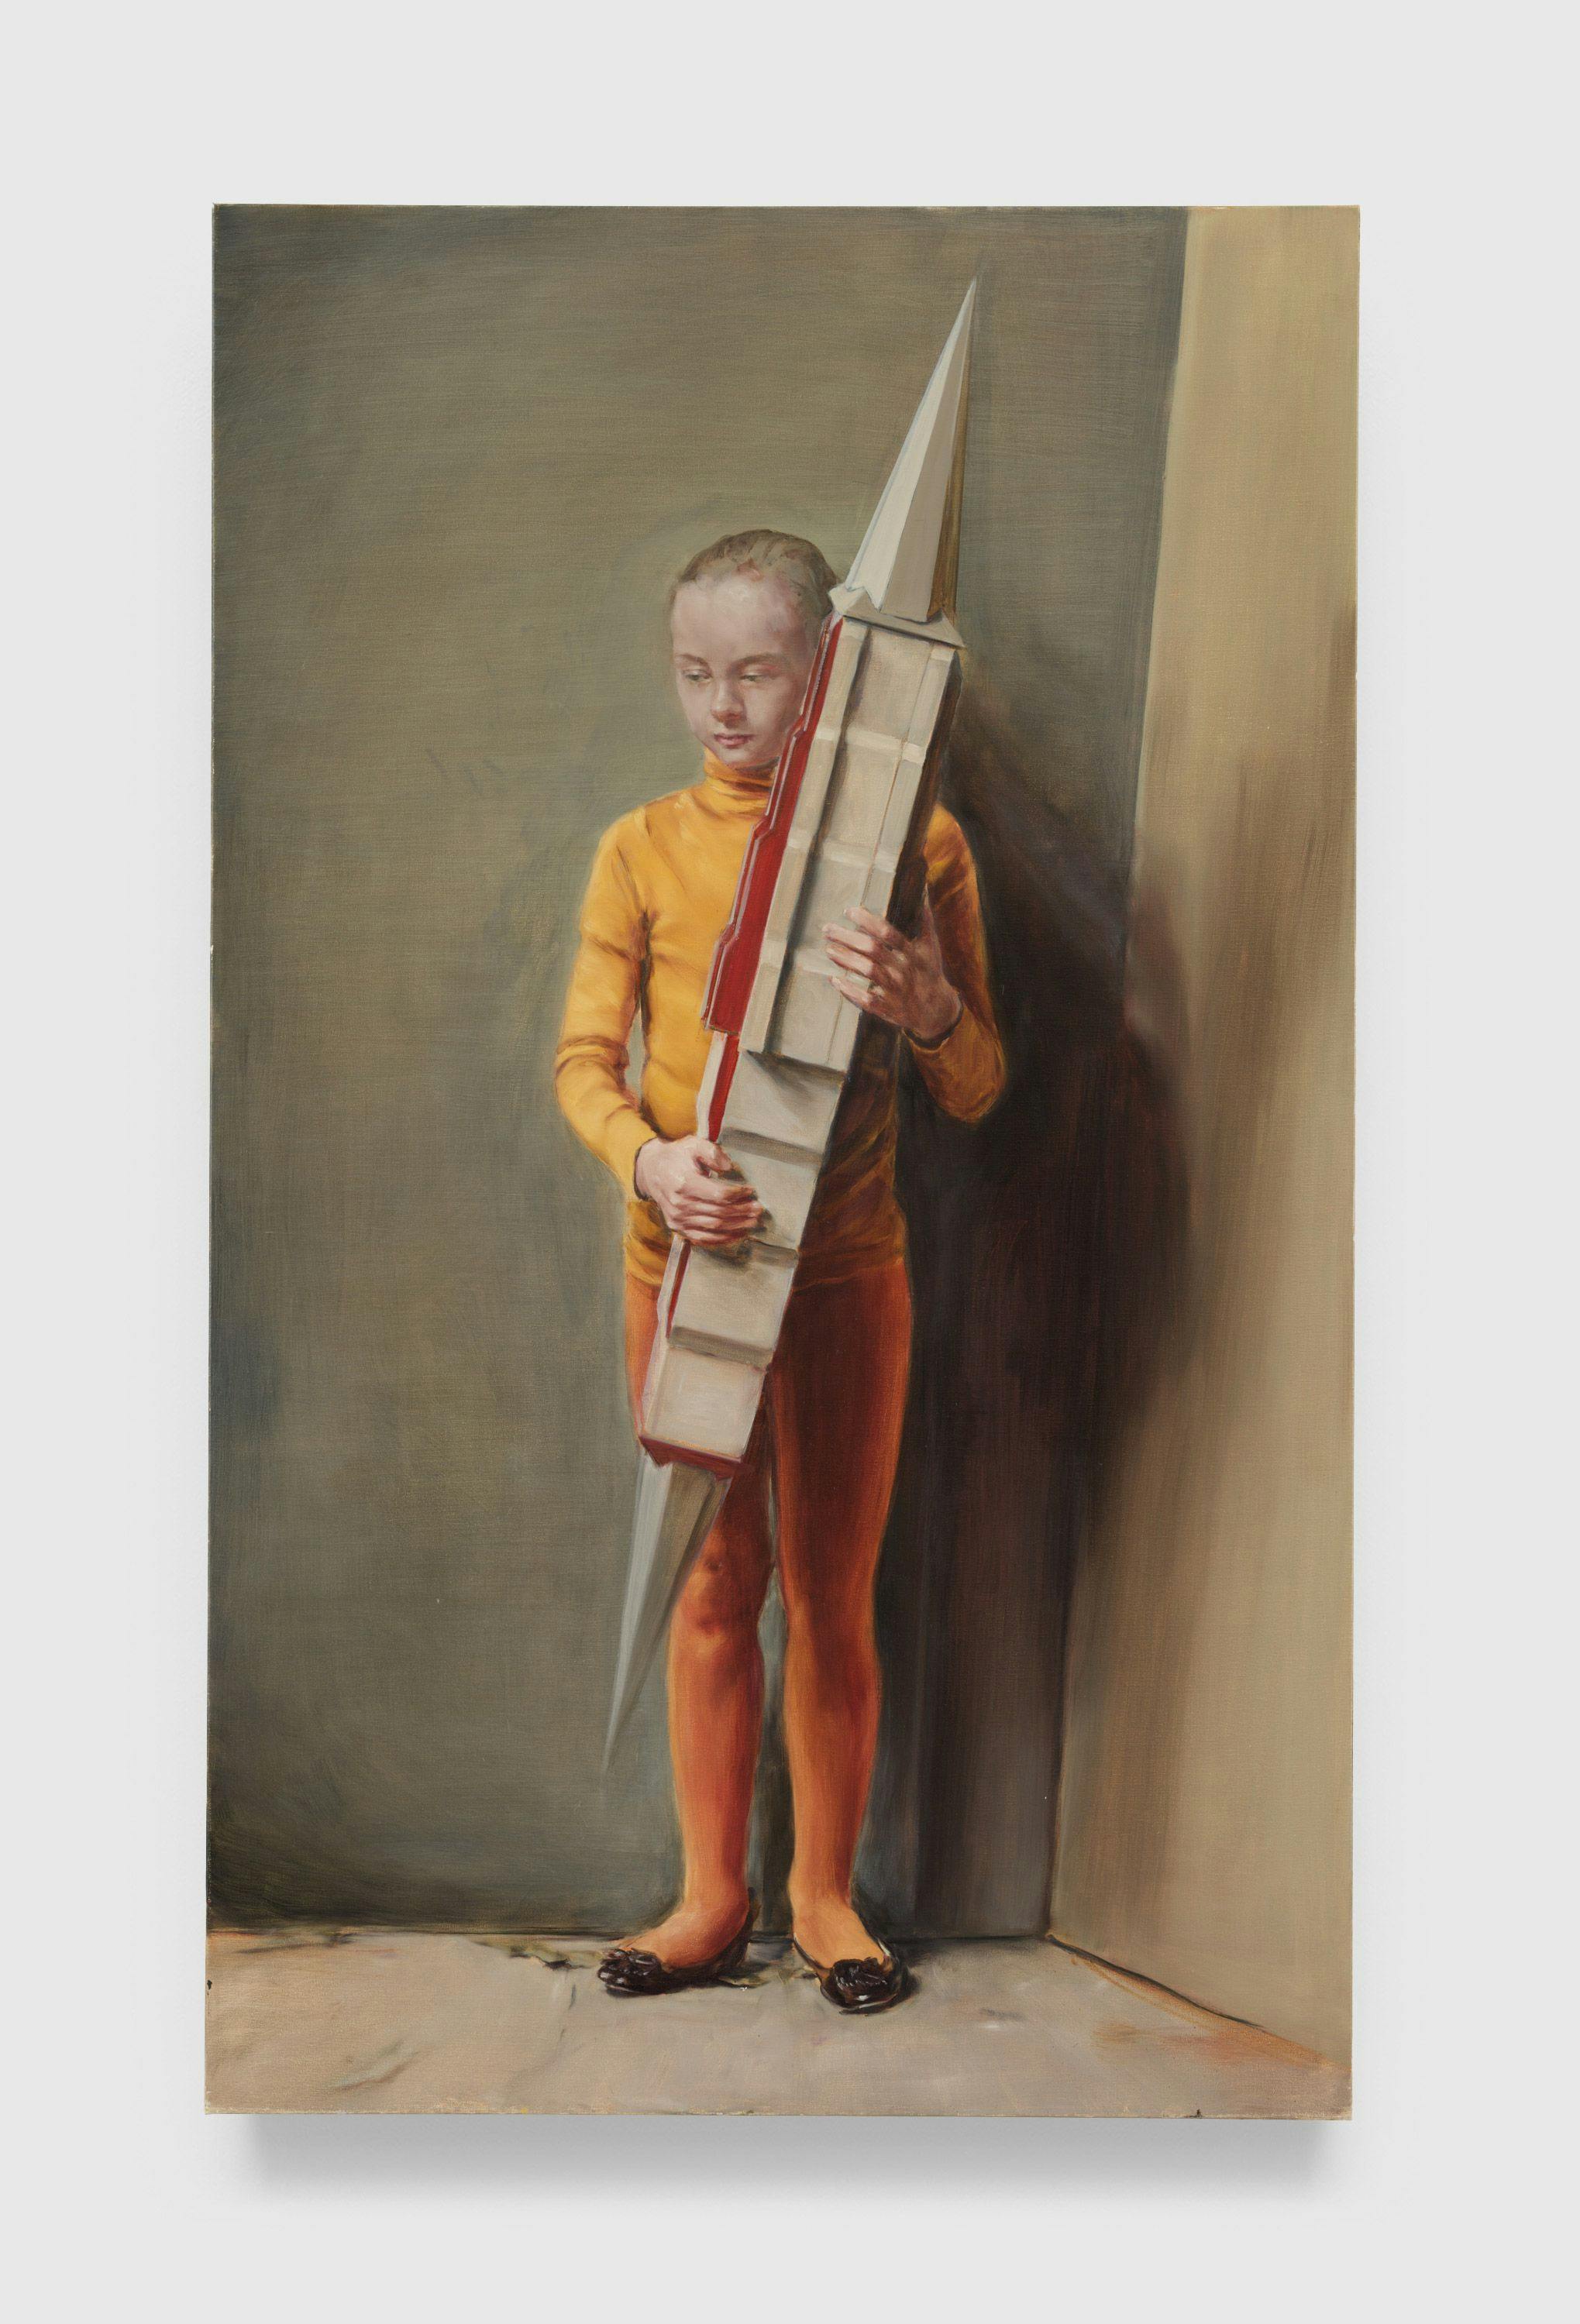 A painting by Michaël Borremans, titled The Missile, dated 2013.